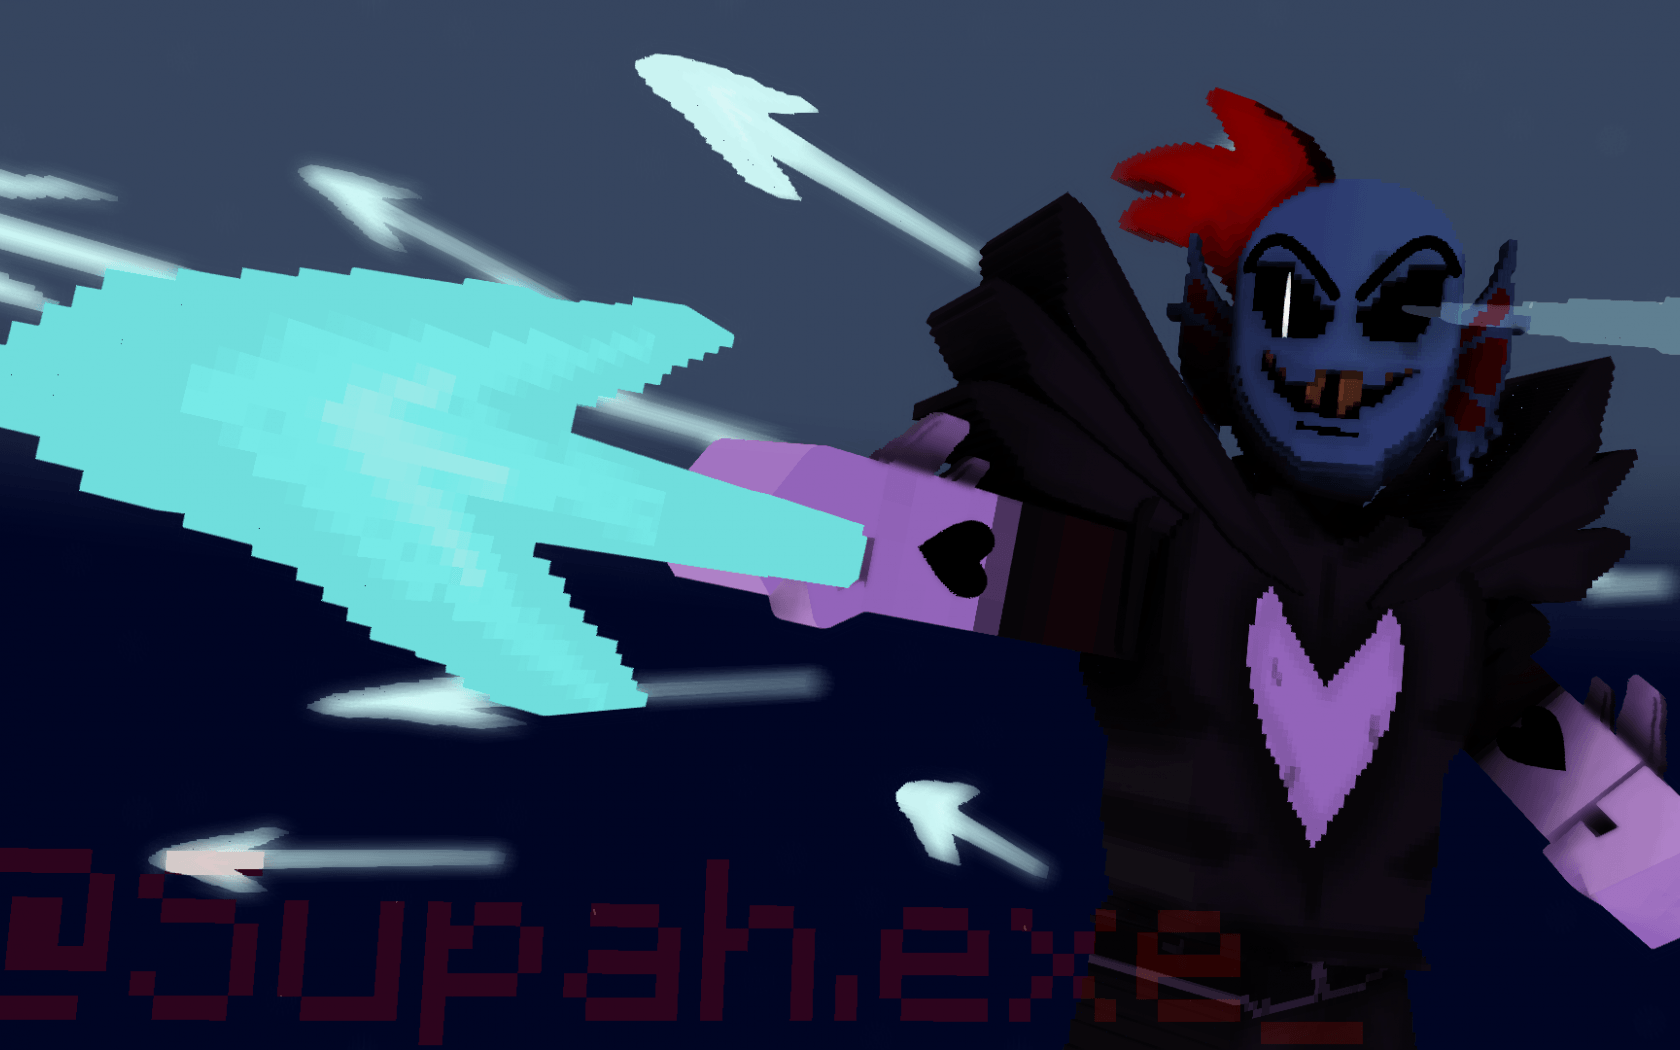 Free download Undyne the Undying Undertale Wallpaper